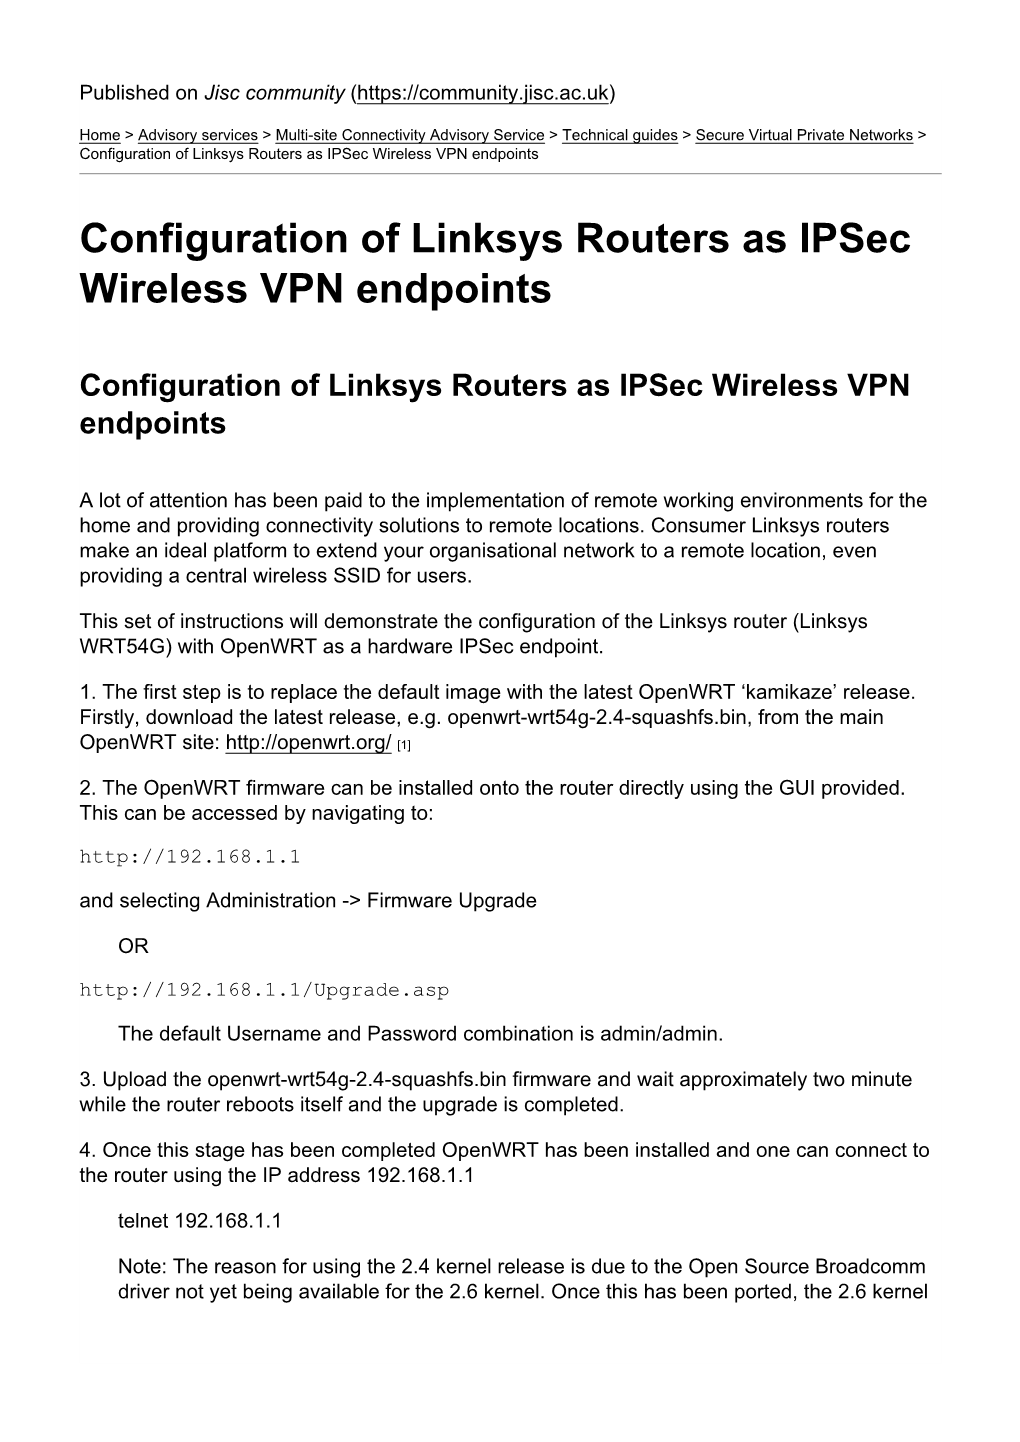 Configuration of Linksys Routers As Ipsec Wireless VPN Endpoints